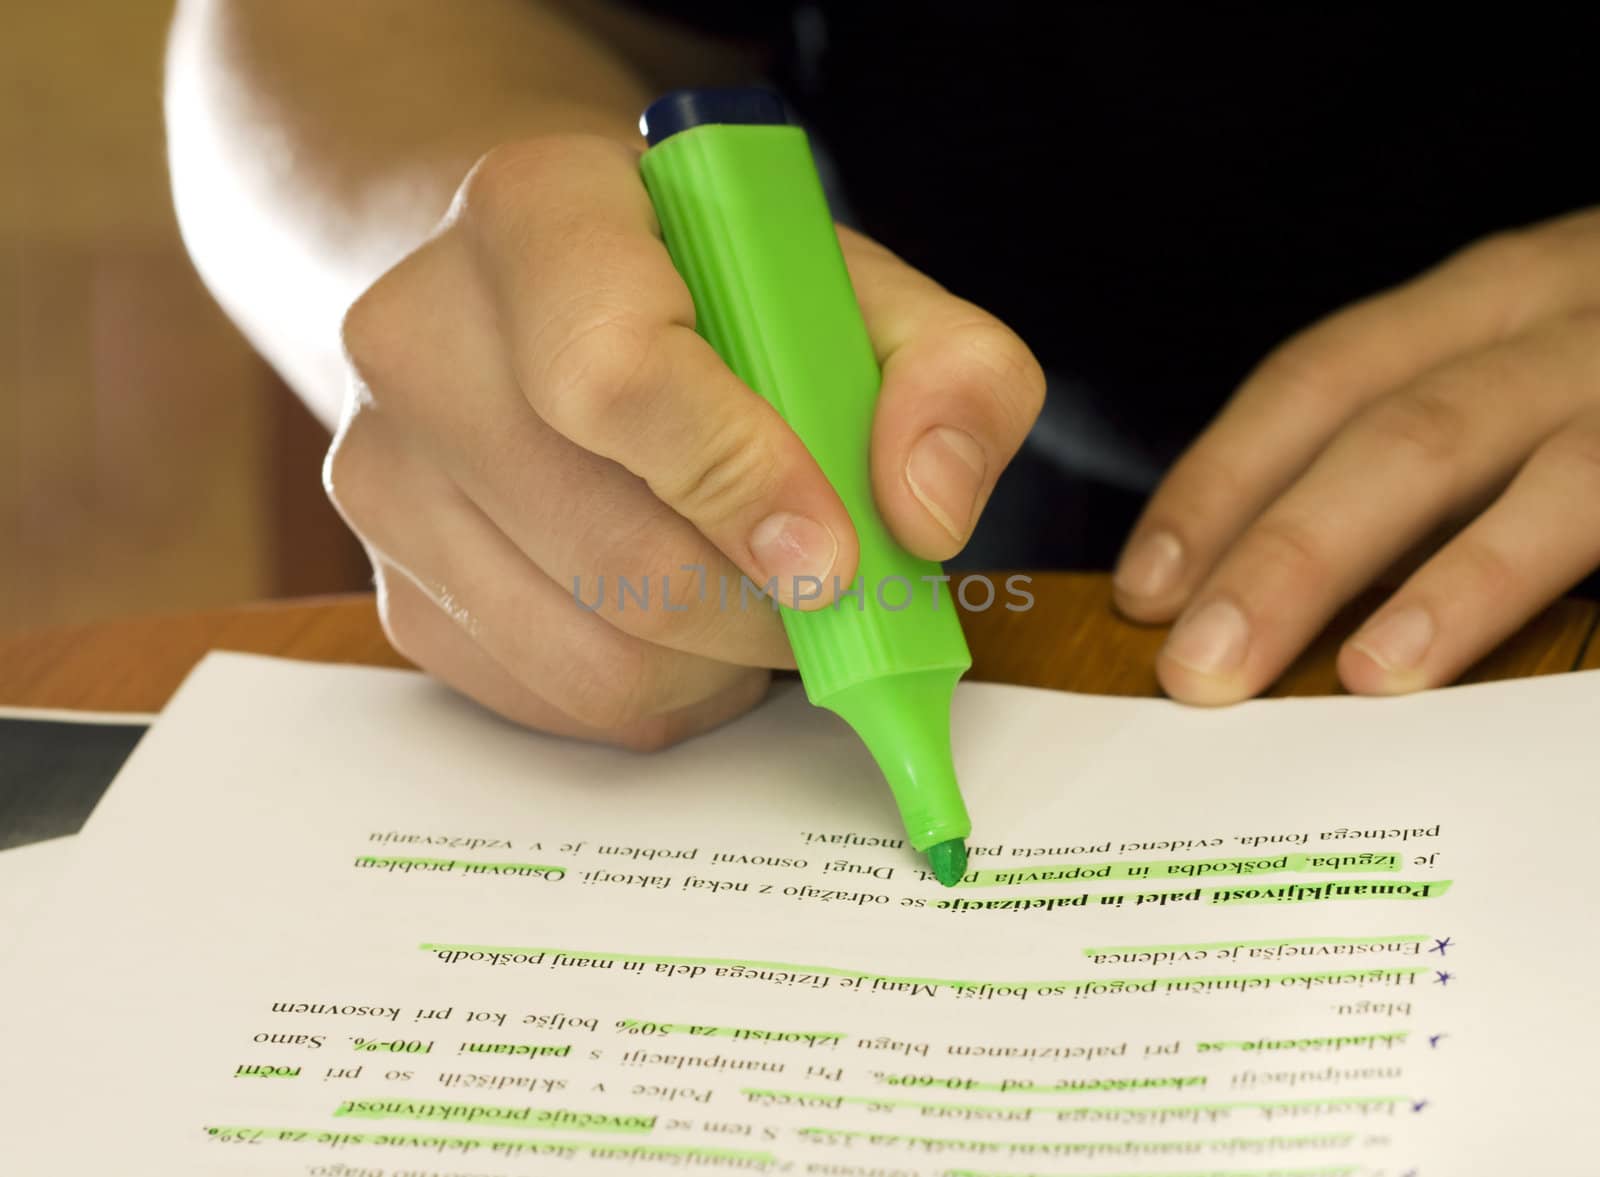 Hands of a student using a green marker on school/university notes.

Lit with three Speedlites: two bulbed ambient ones and a backlight.